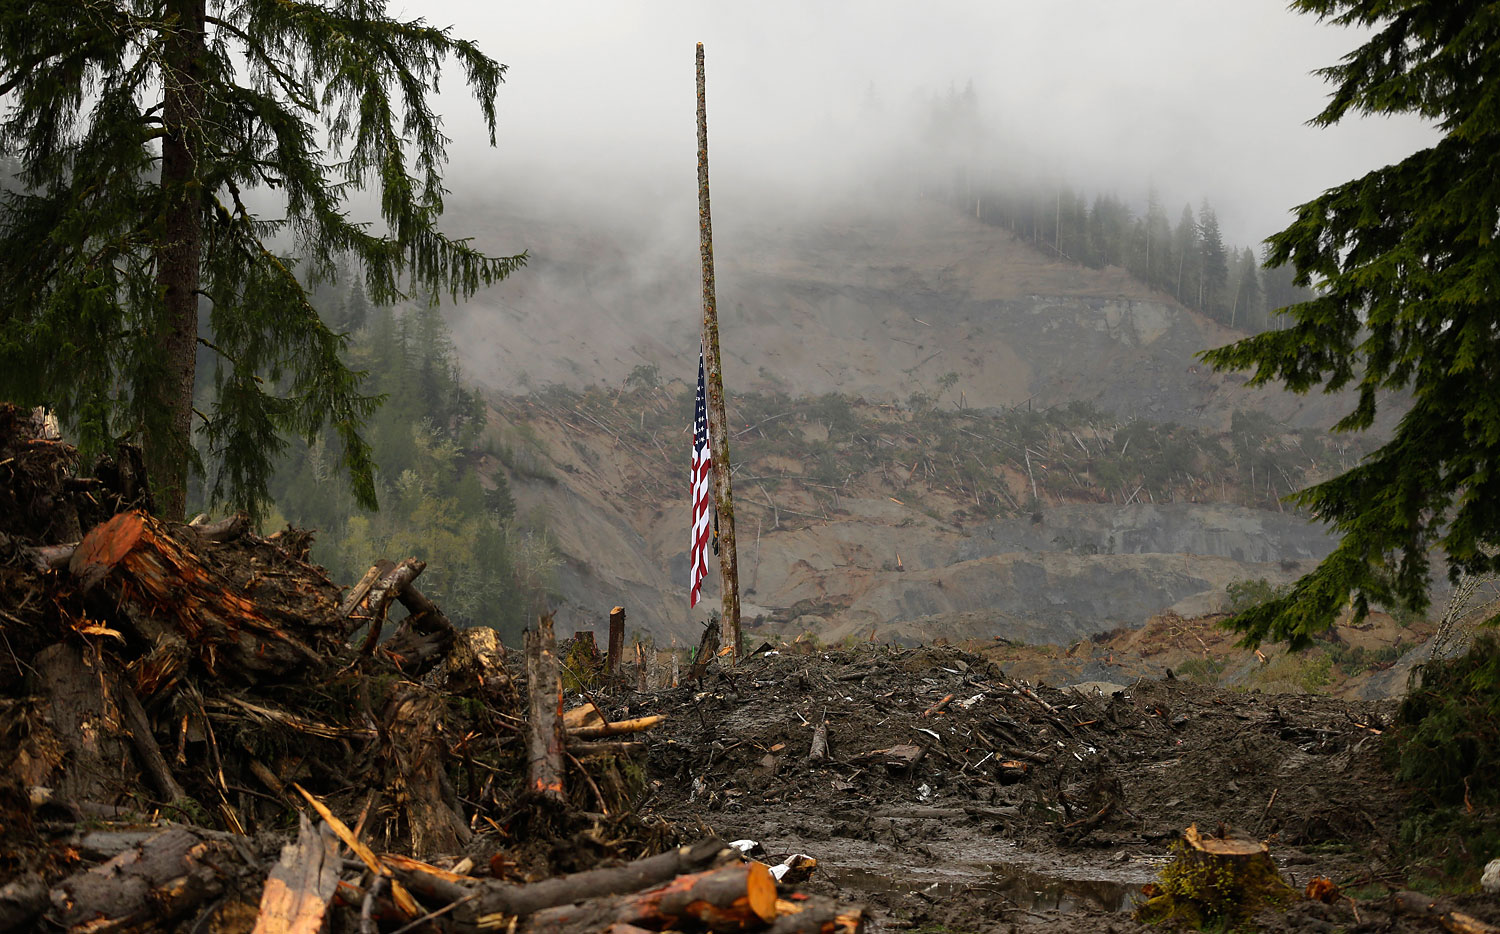 A flag rests at half staff on a cedar pole, Wednesday, April 16, 2014, with the face of the massive deadly mudslide that hit the community of Oso, Wash. on March 22, 2014 behind it.